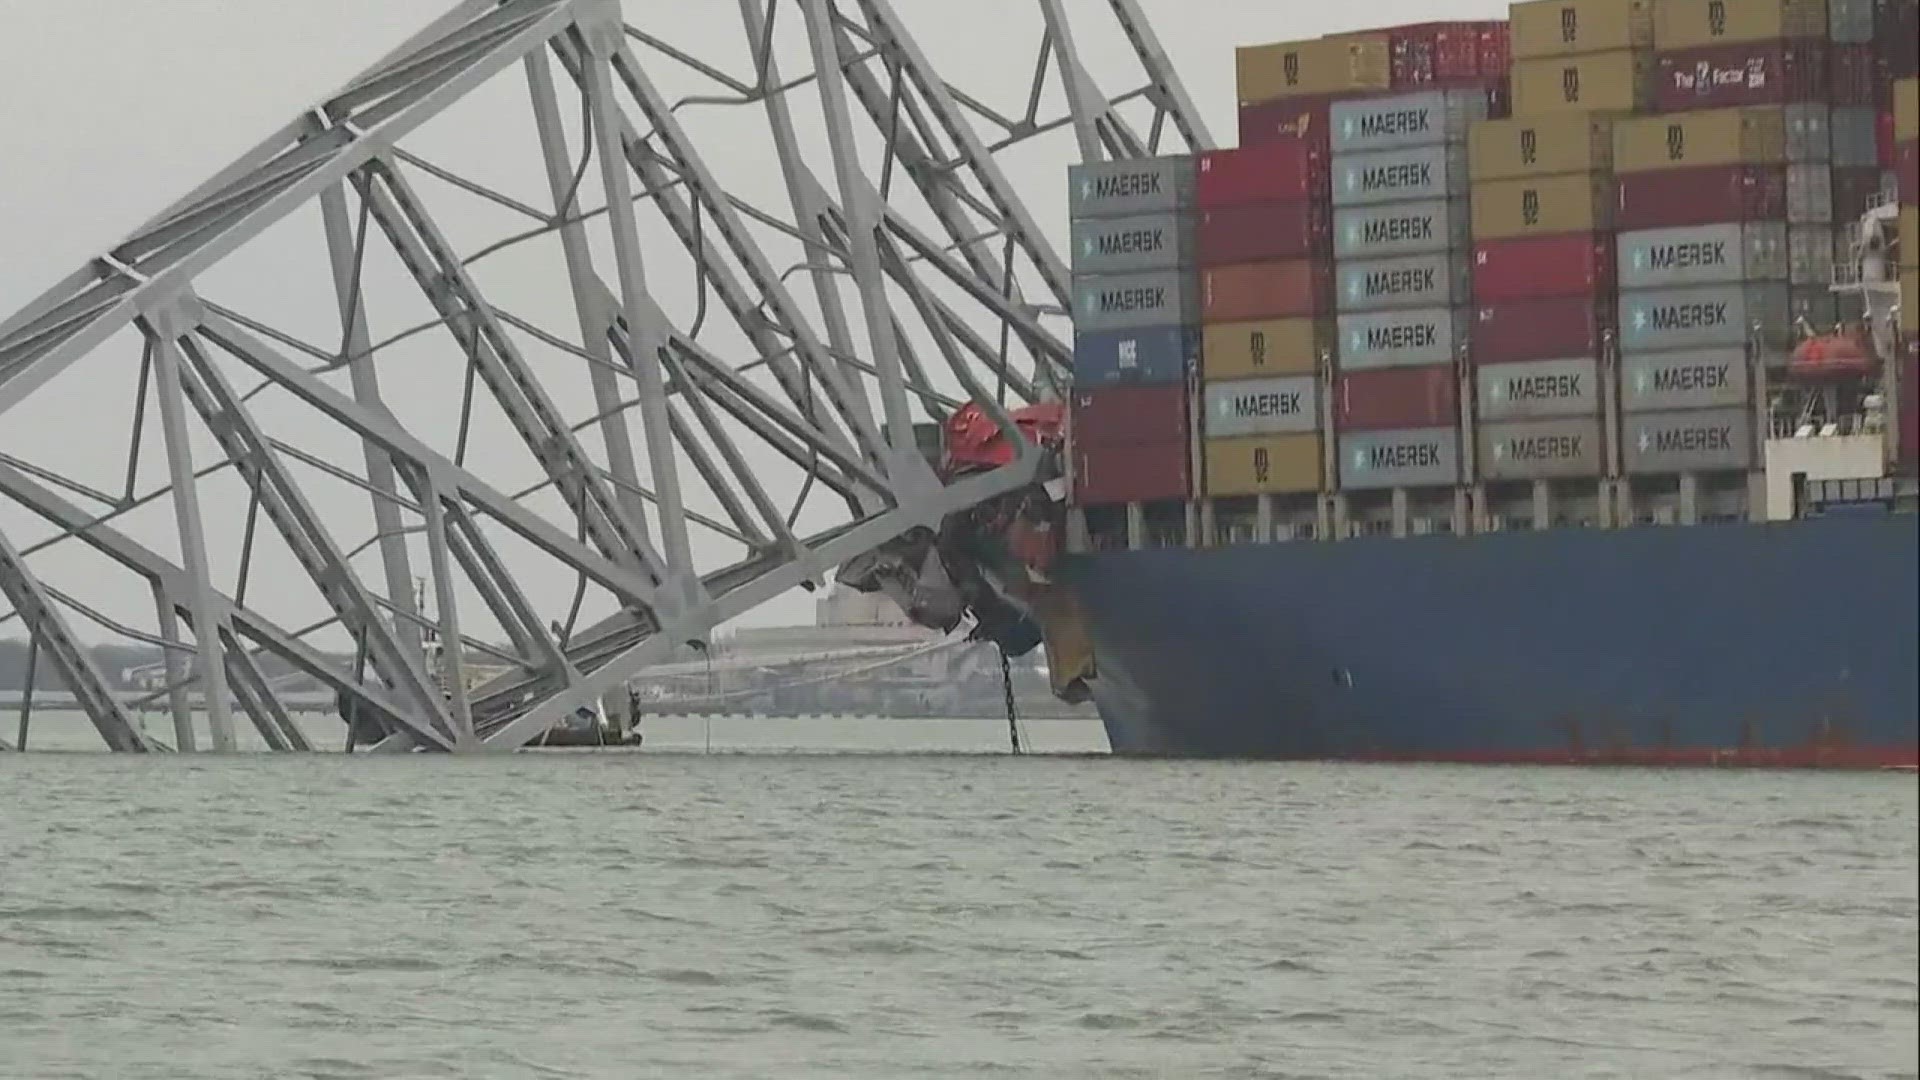 A cargo ship lost power and rammed into a major bridge in Baltimore early Tuesday, destroying the span in a matter of seconds. Here's what we know.